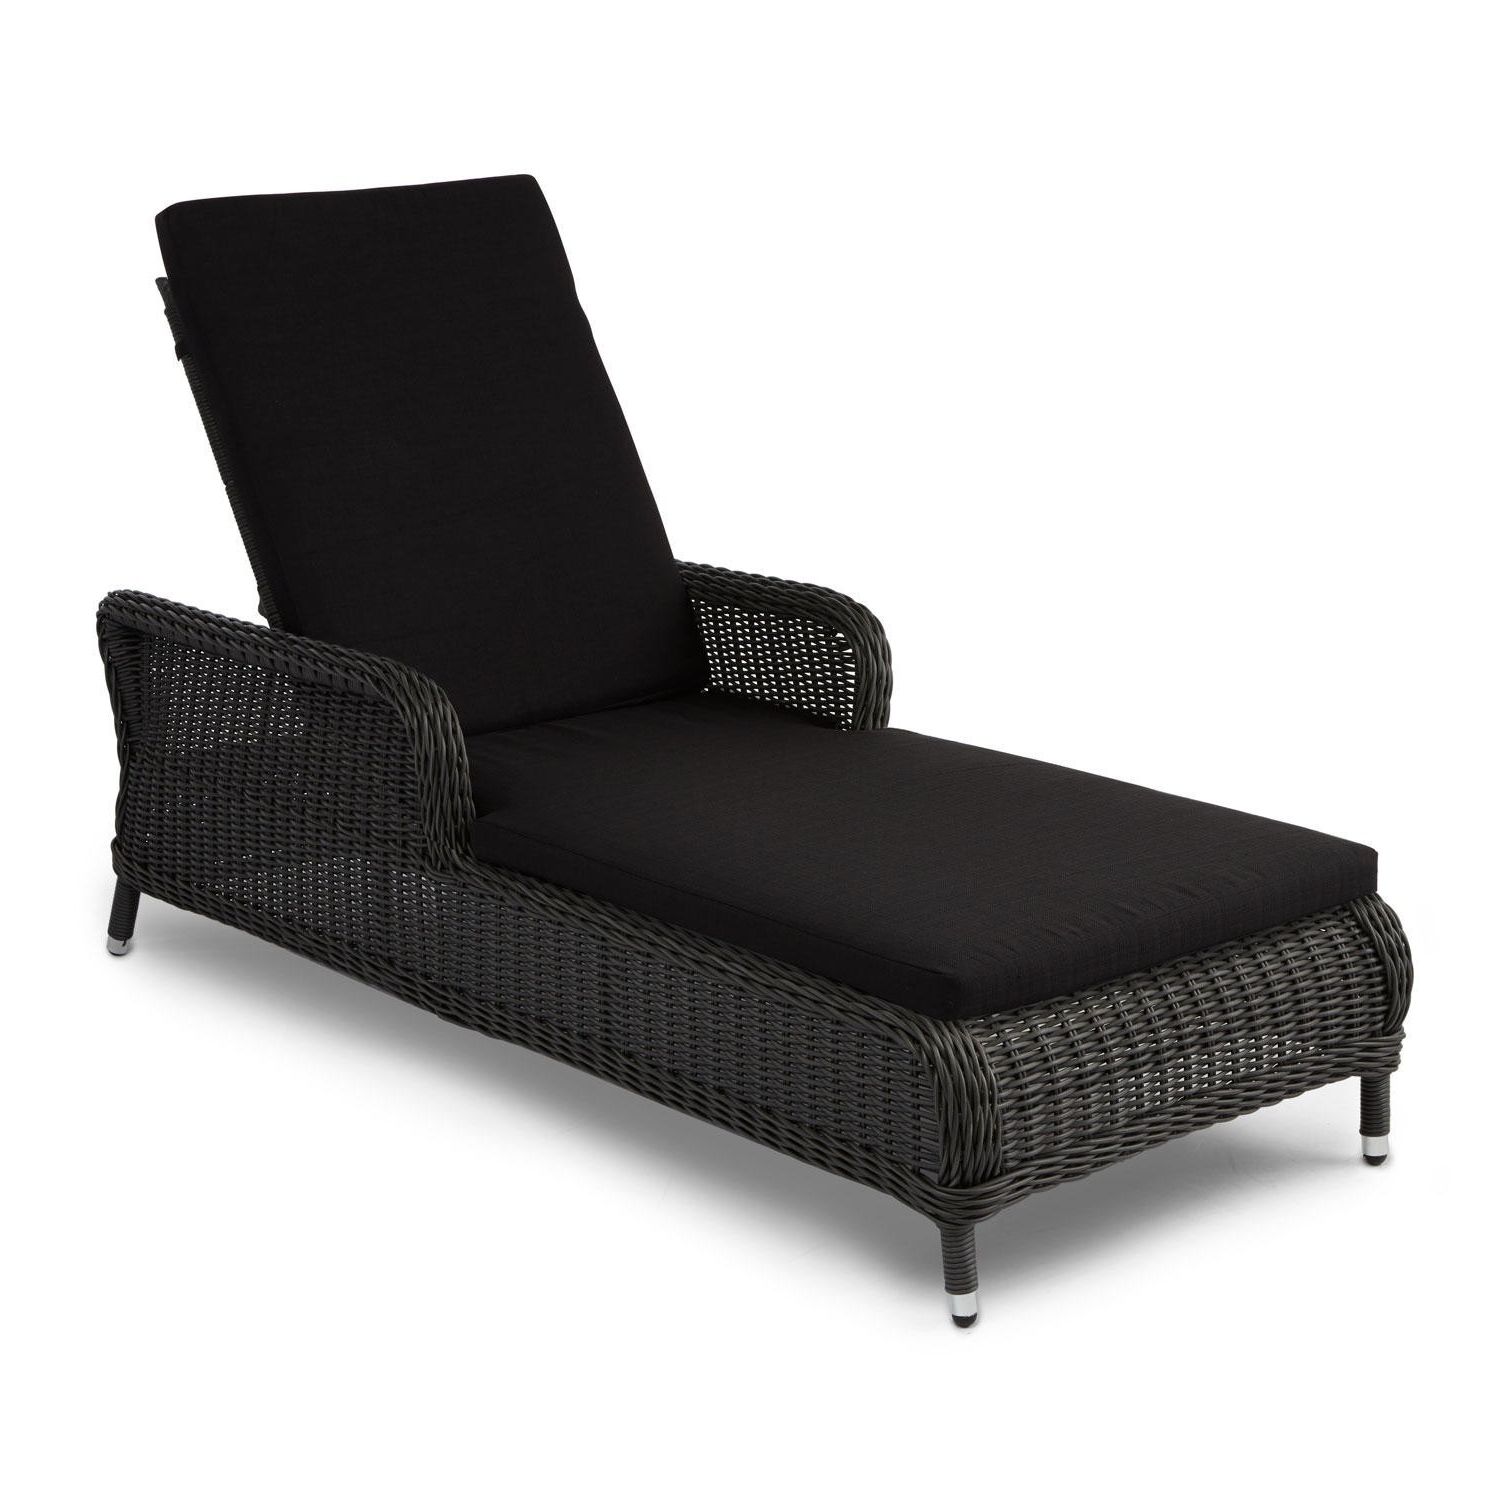 Martha Stewart Outdoor Chaise Lounge Chairs Regarding Widely Used Outdoor : Tufted Chaise Lounge With Arms White Outdoor Chaise (View 15 of 15)